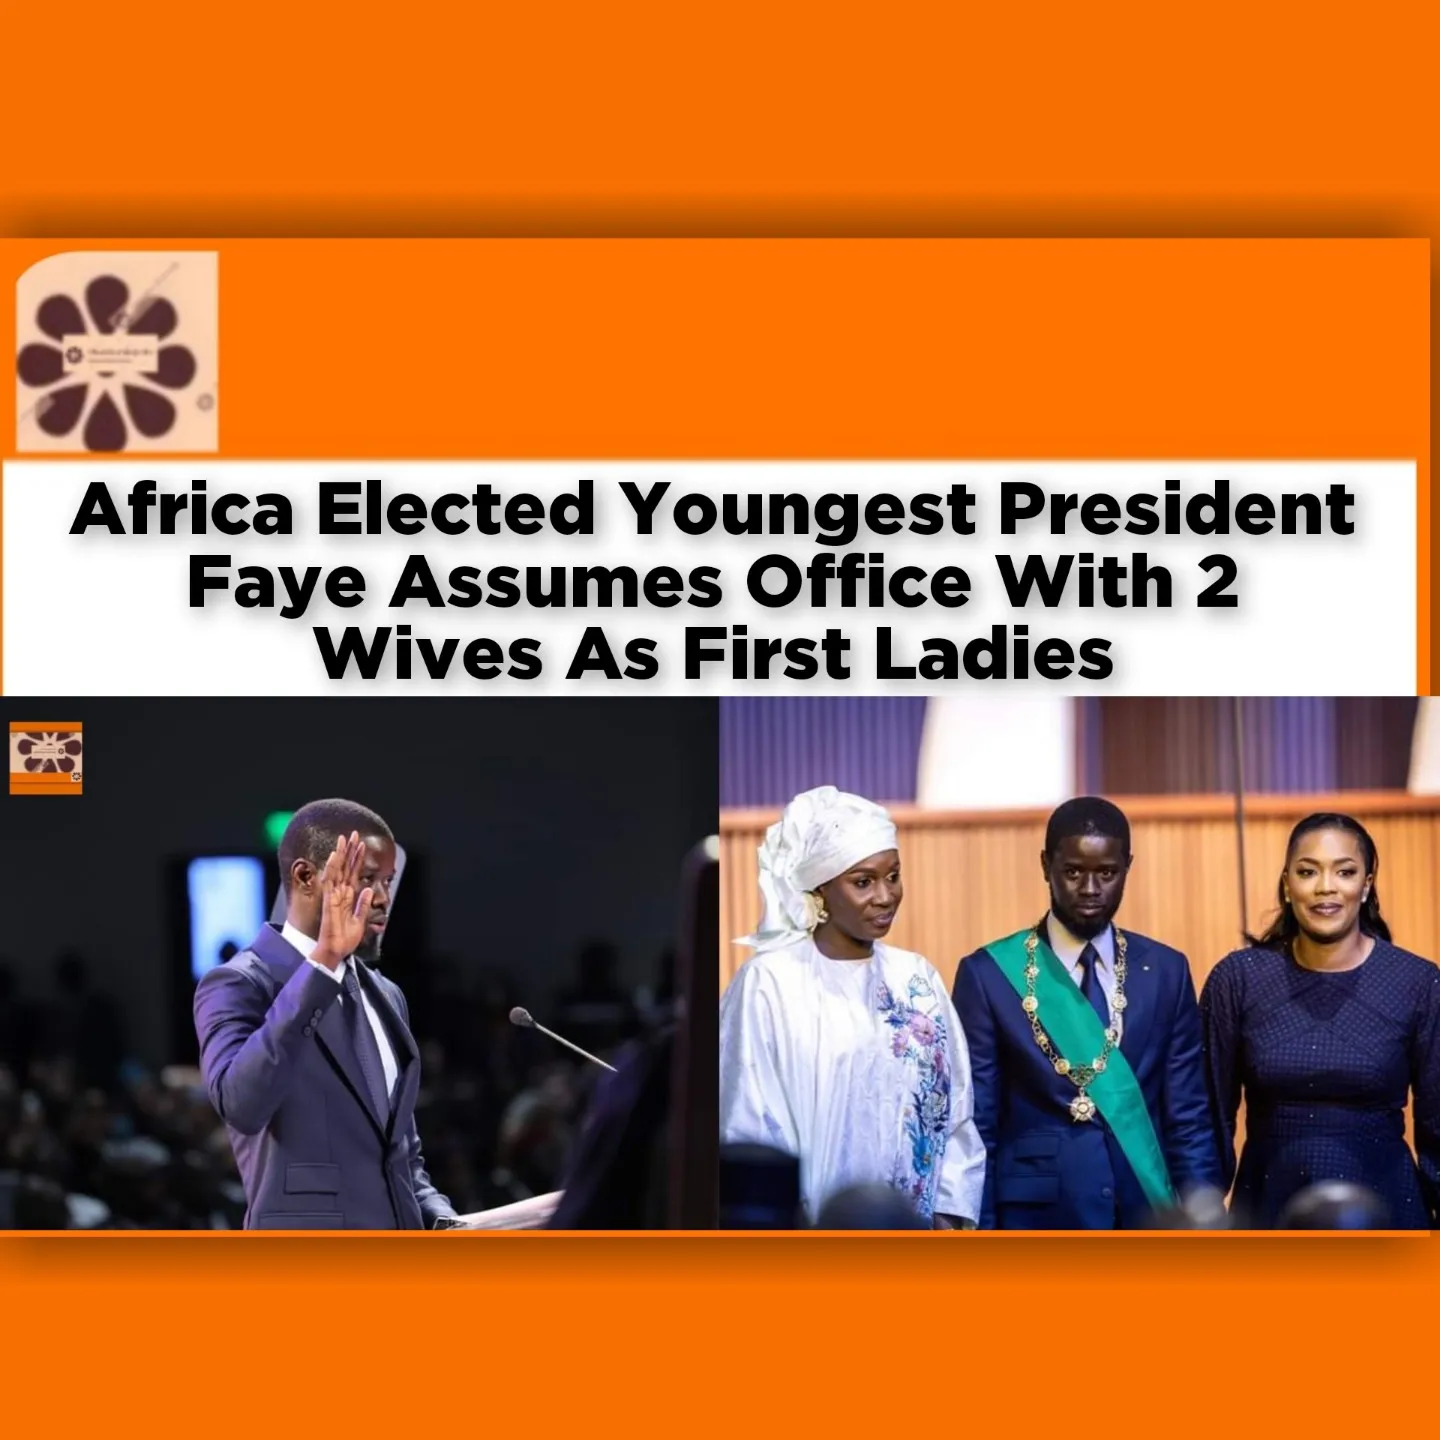 Africa Elected Youngest President Faye Assumes Office With 2 Wives As First Ladies